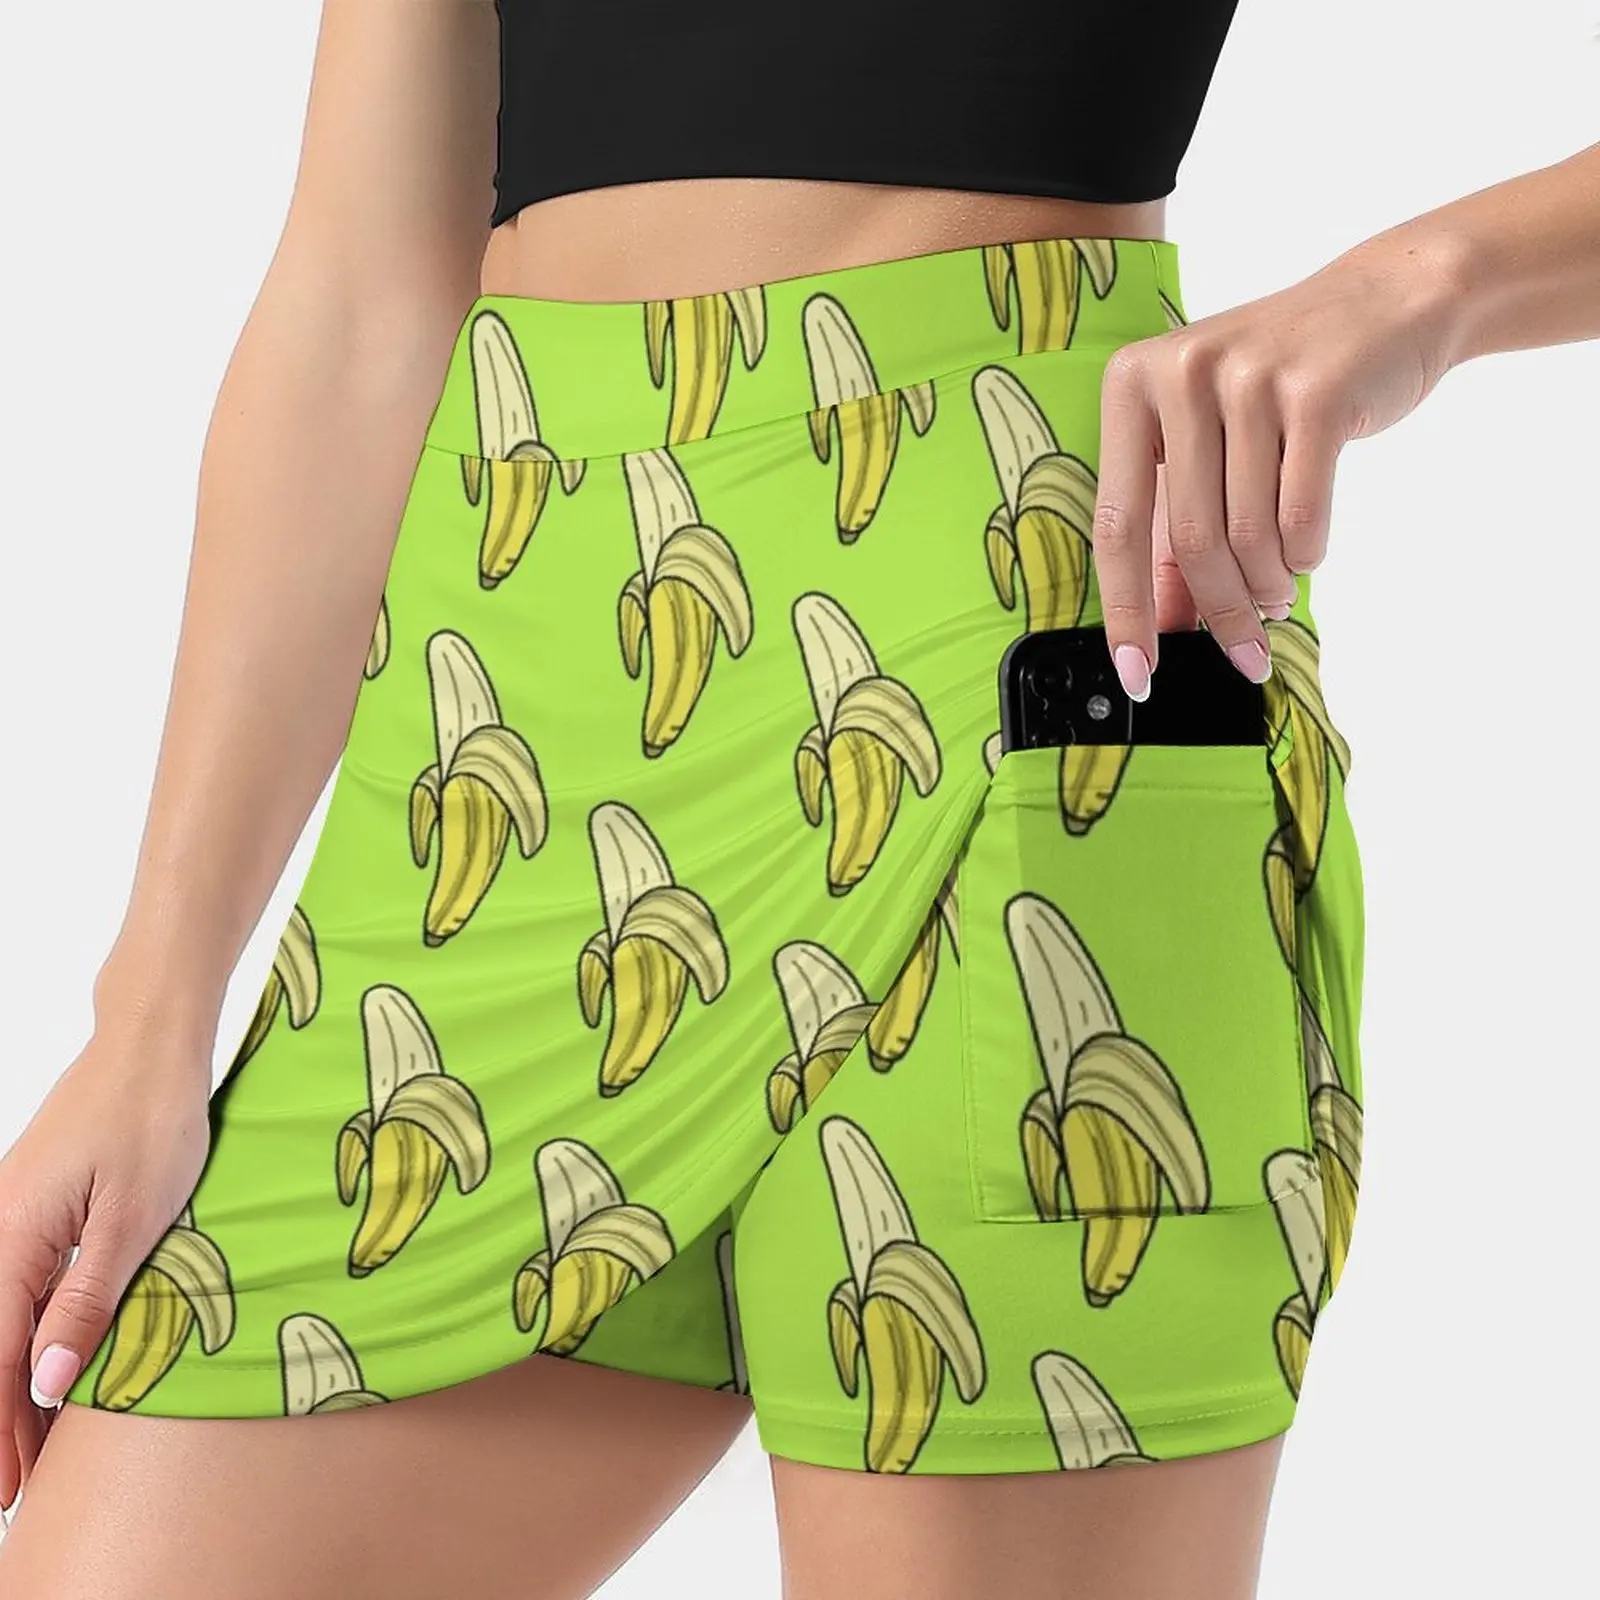 Banana - Lime Women'S Fashion Sporting Skirt With Pockets Tennis Golf Running Skirts Breakfast Bright Cooking Cool Cute